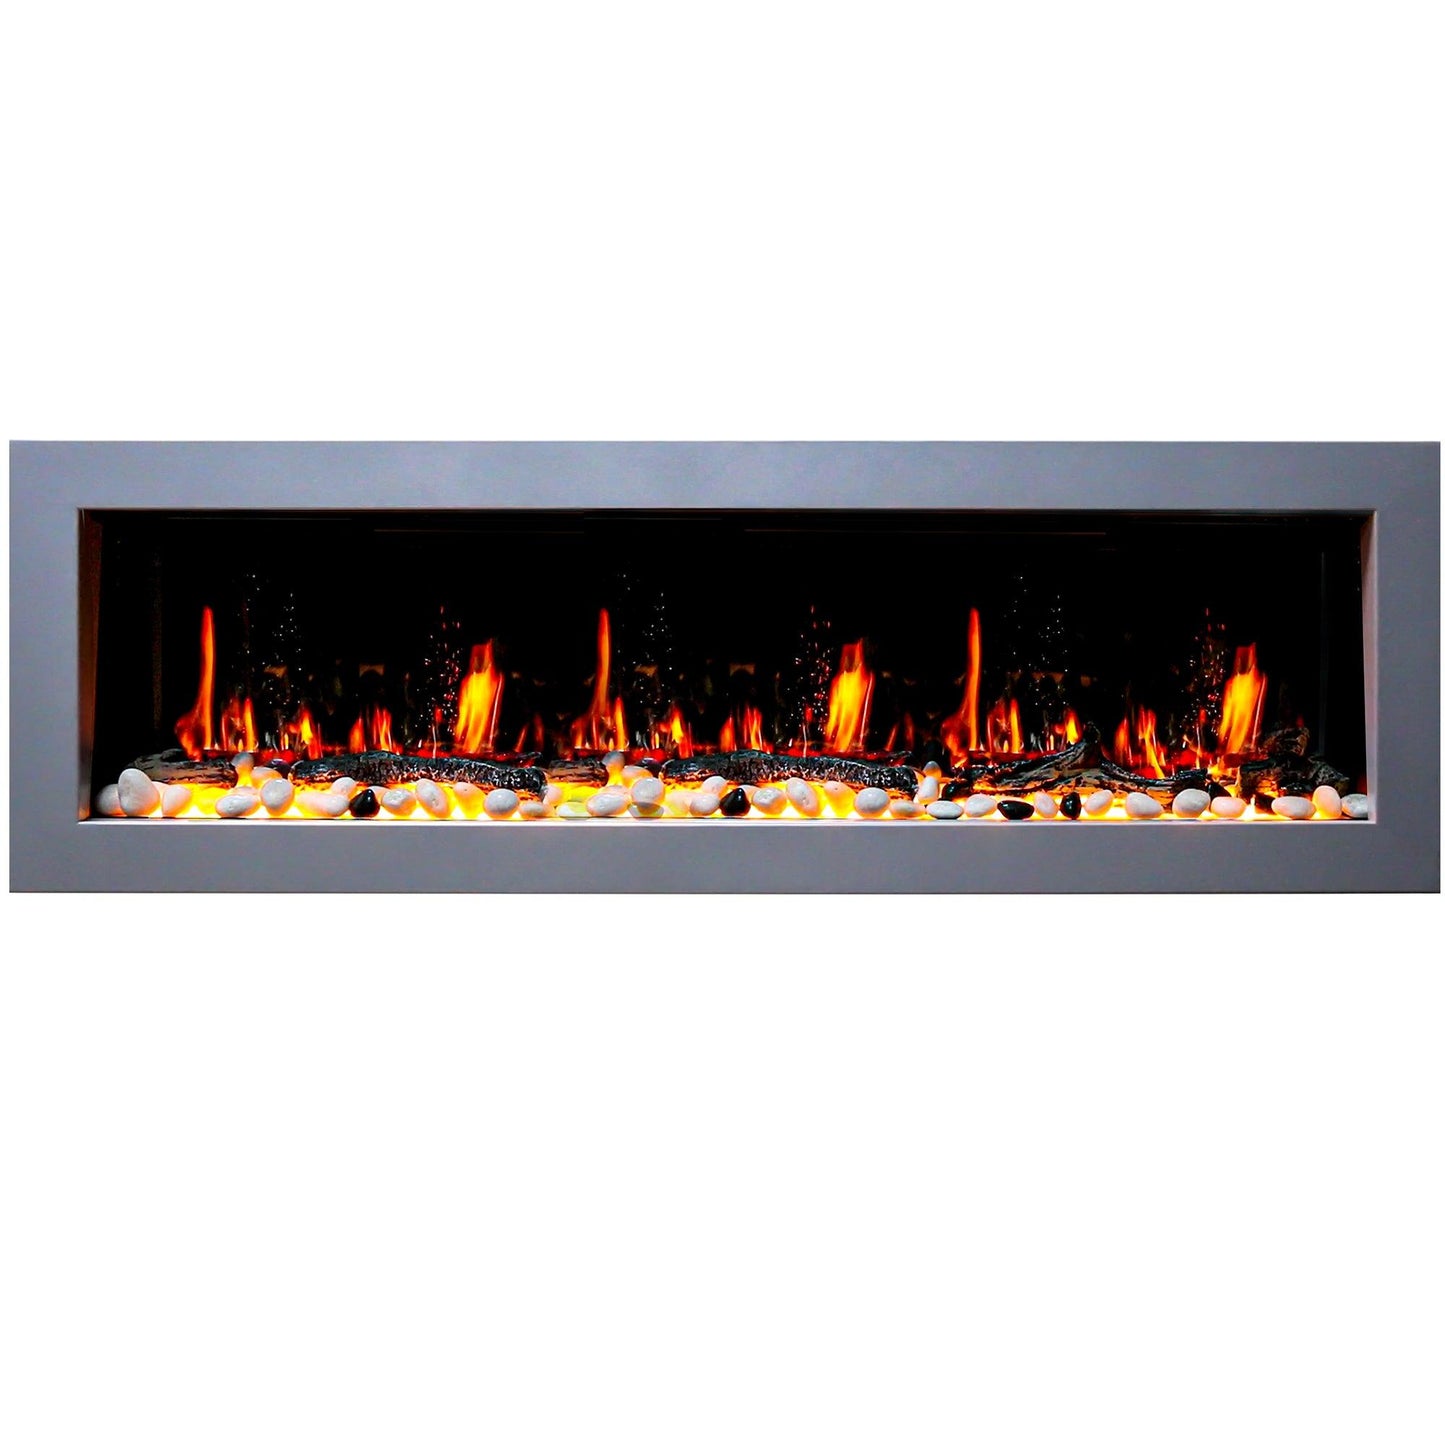 ZopaFlame™ 78" Linear Wall-mount Electric Fireplace - SP19788V - ZopaFlame Fireplaces